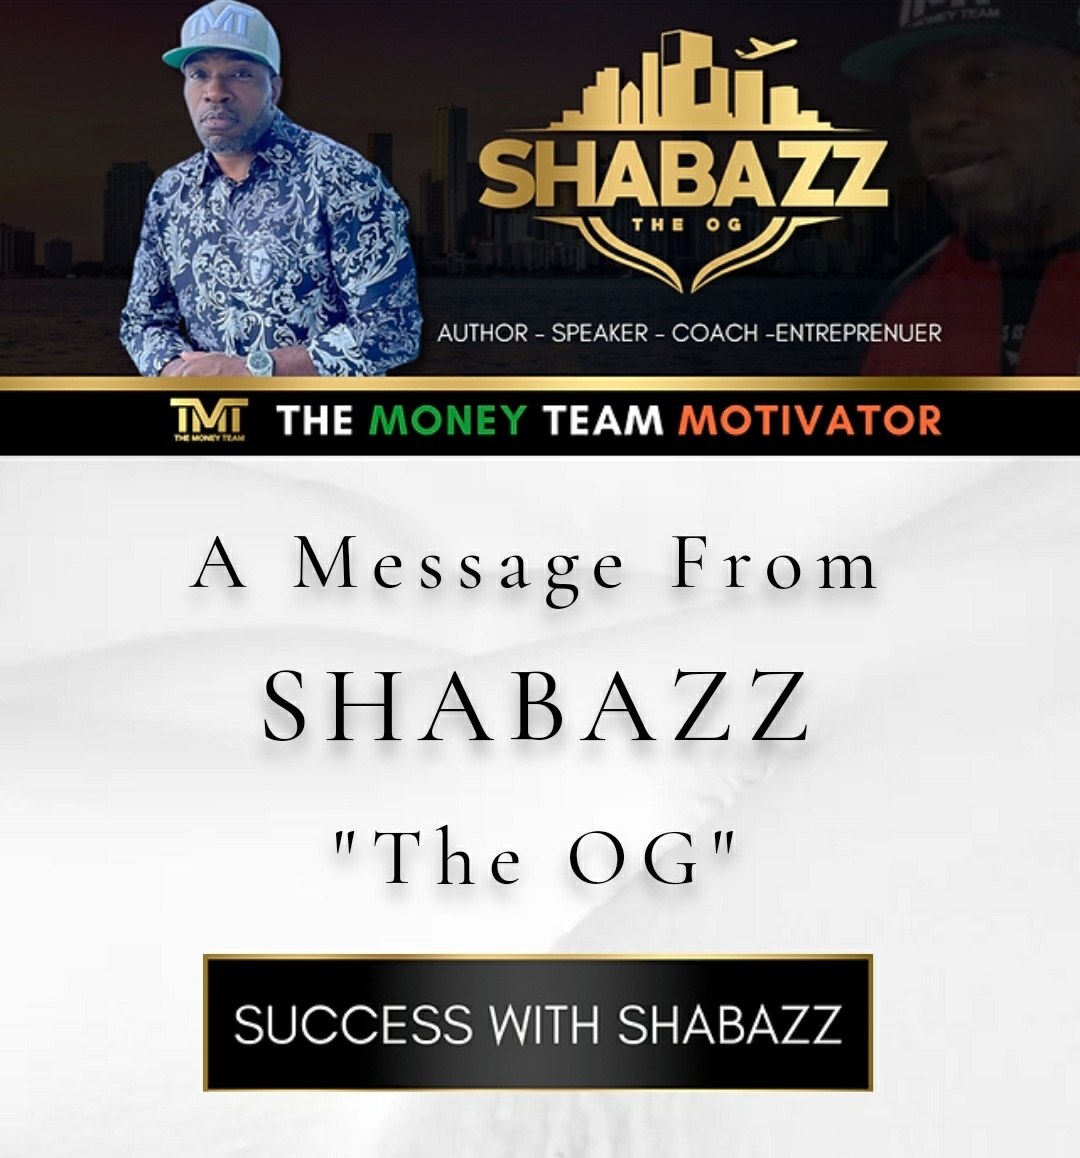 Success with Shabazz